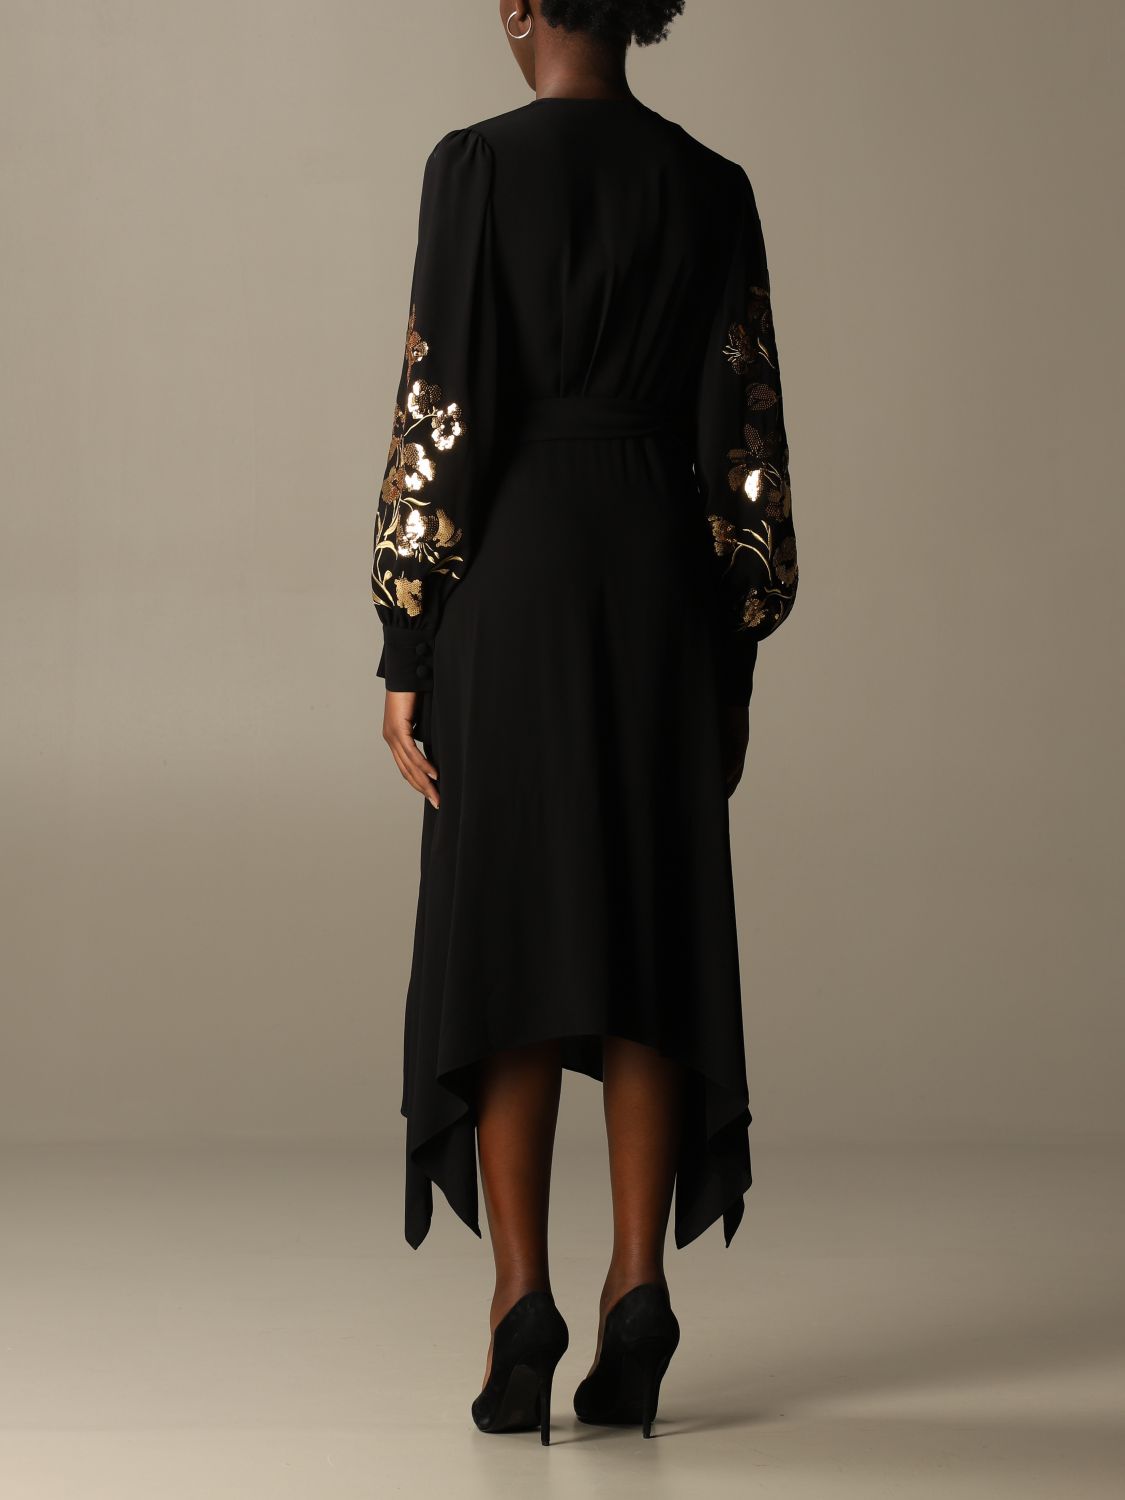 Tory Burch Outlet: long dress with lurex embroidery - Black | Tory Burch  dress 76179 online on 